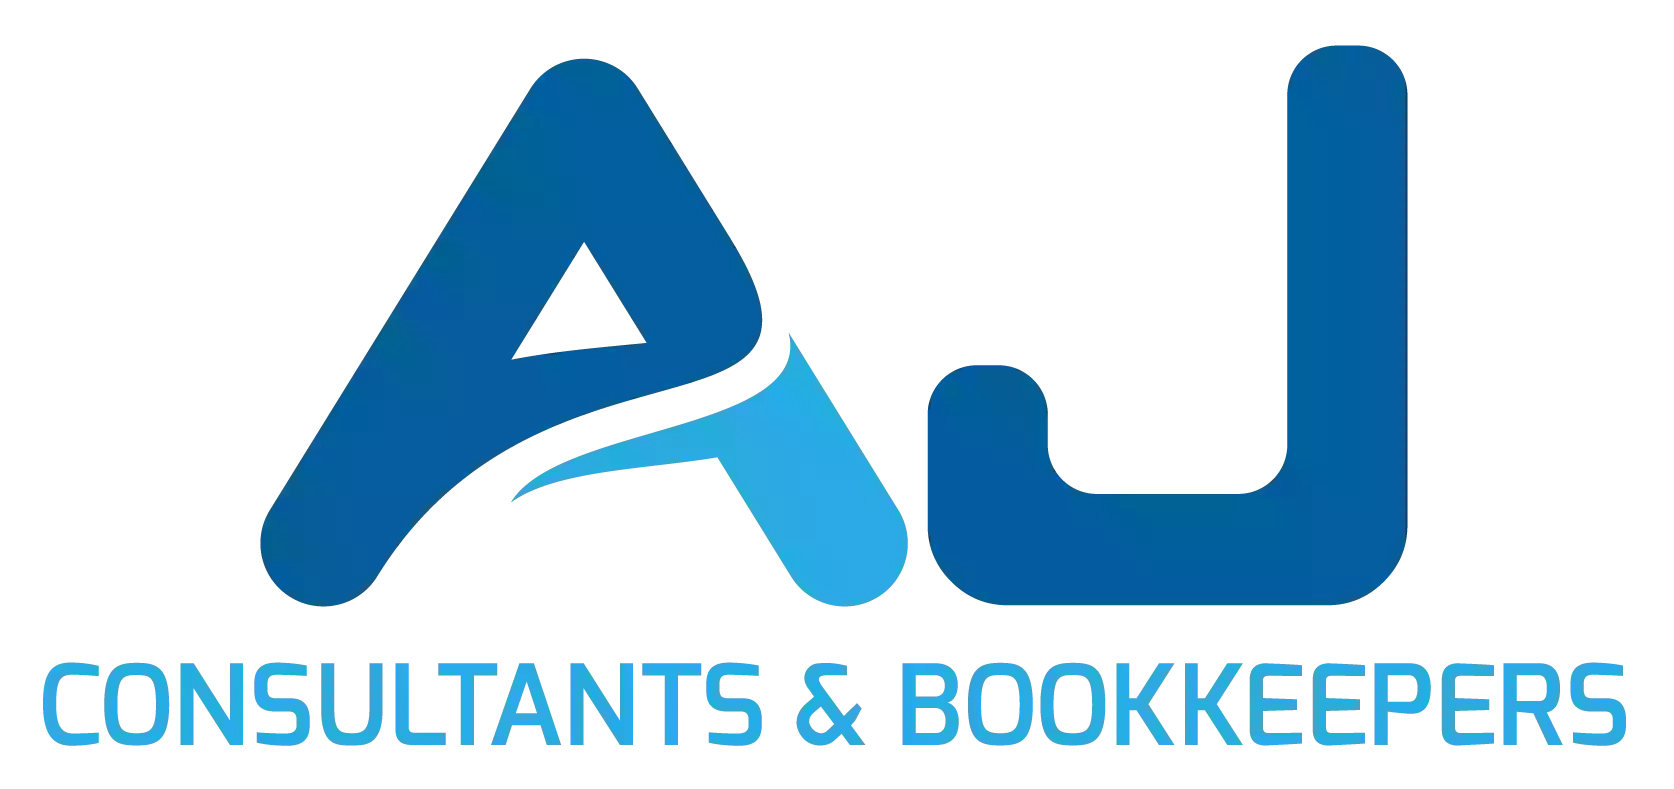 AJ Consultants and Bookkeepers Limited